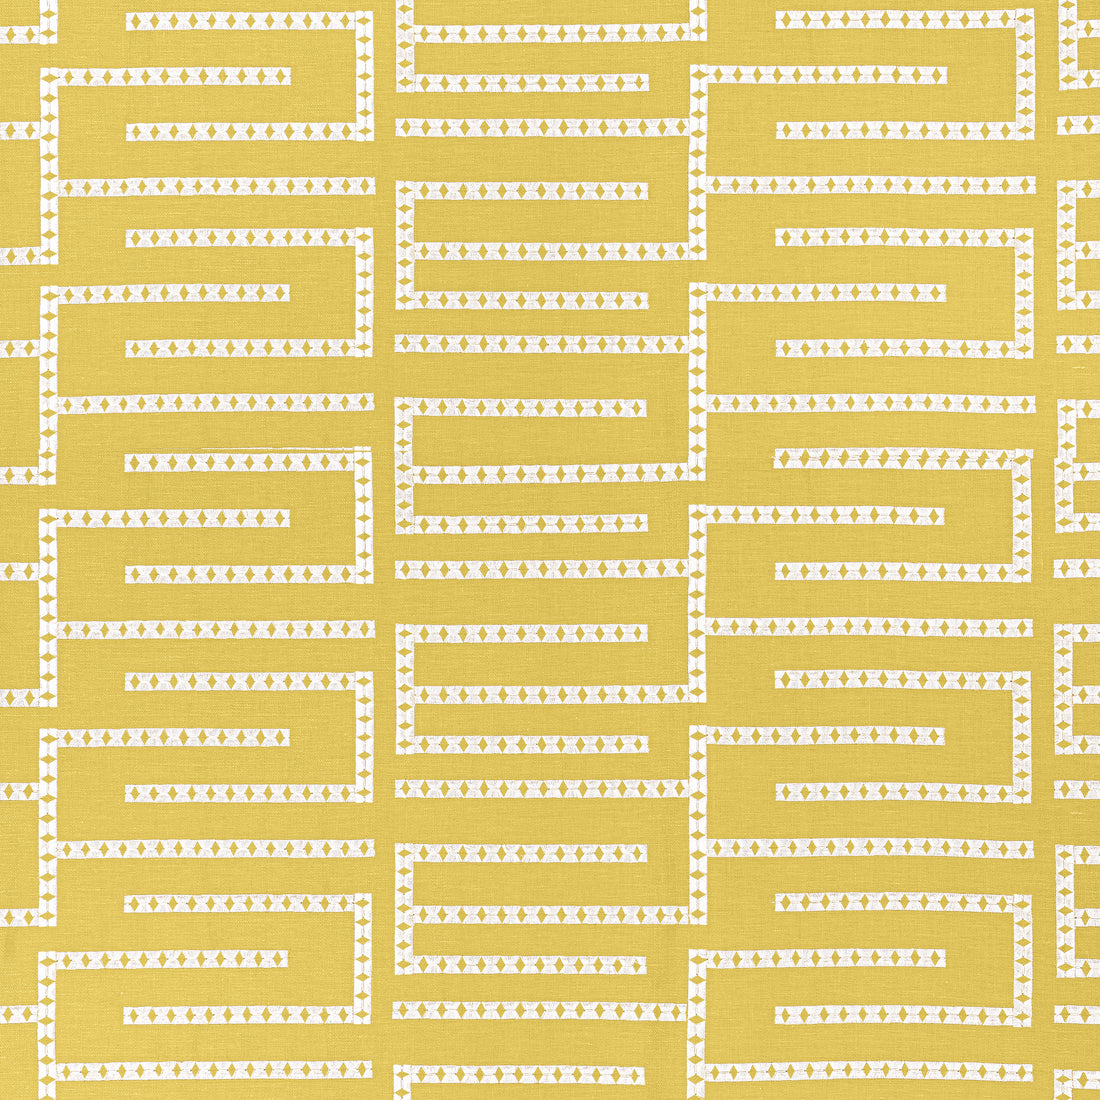 Architect Embroidery fabric in harvest gold - pattern number W713632 - by Thibaut in the Grand Palace collection